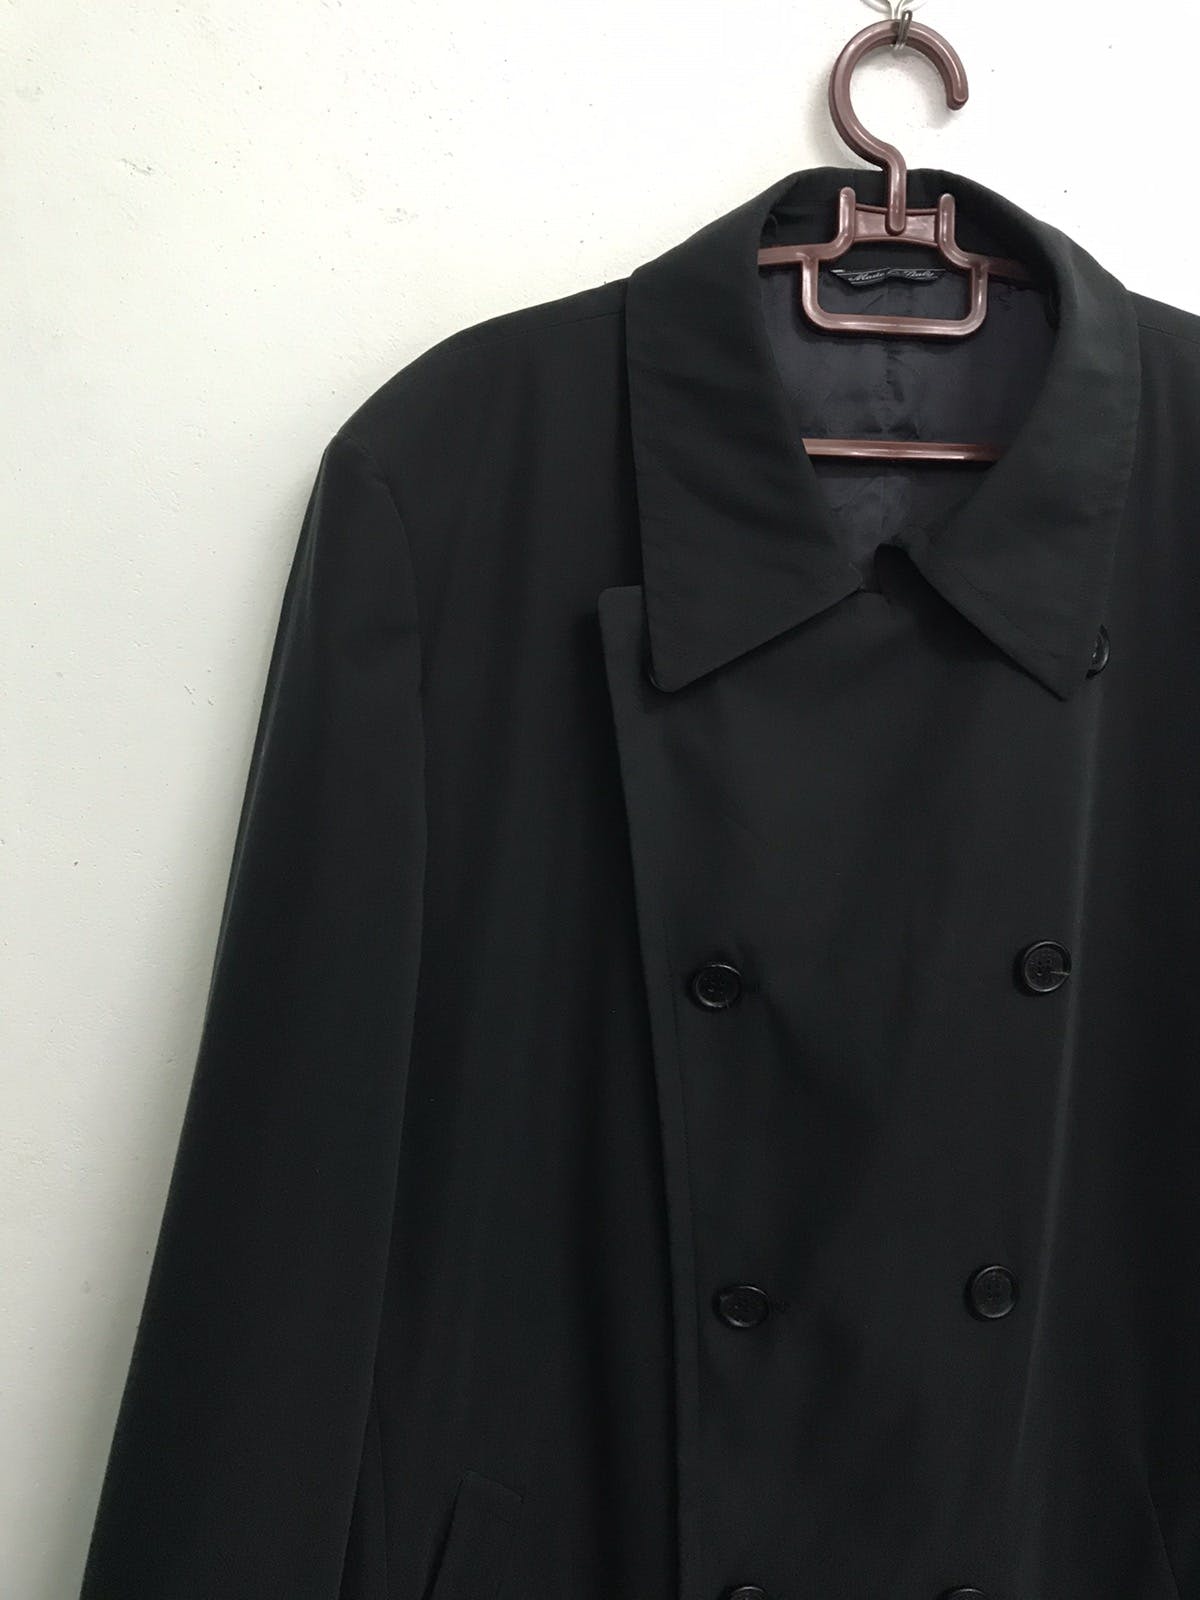 Gucci Long Coat/Jacket Made in Italy - 4